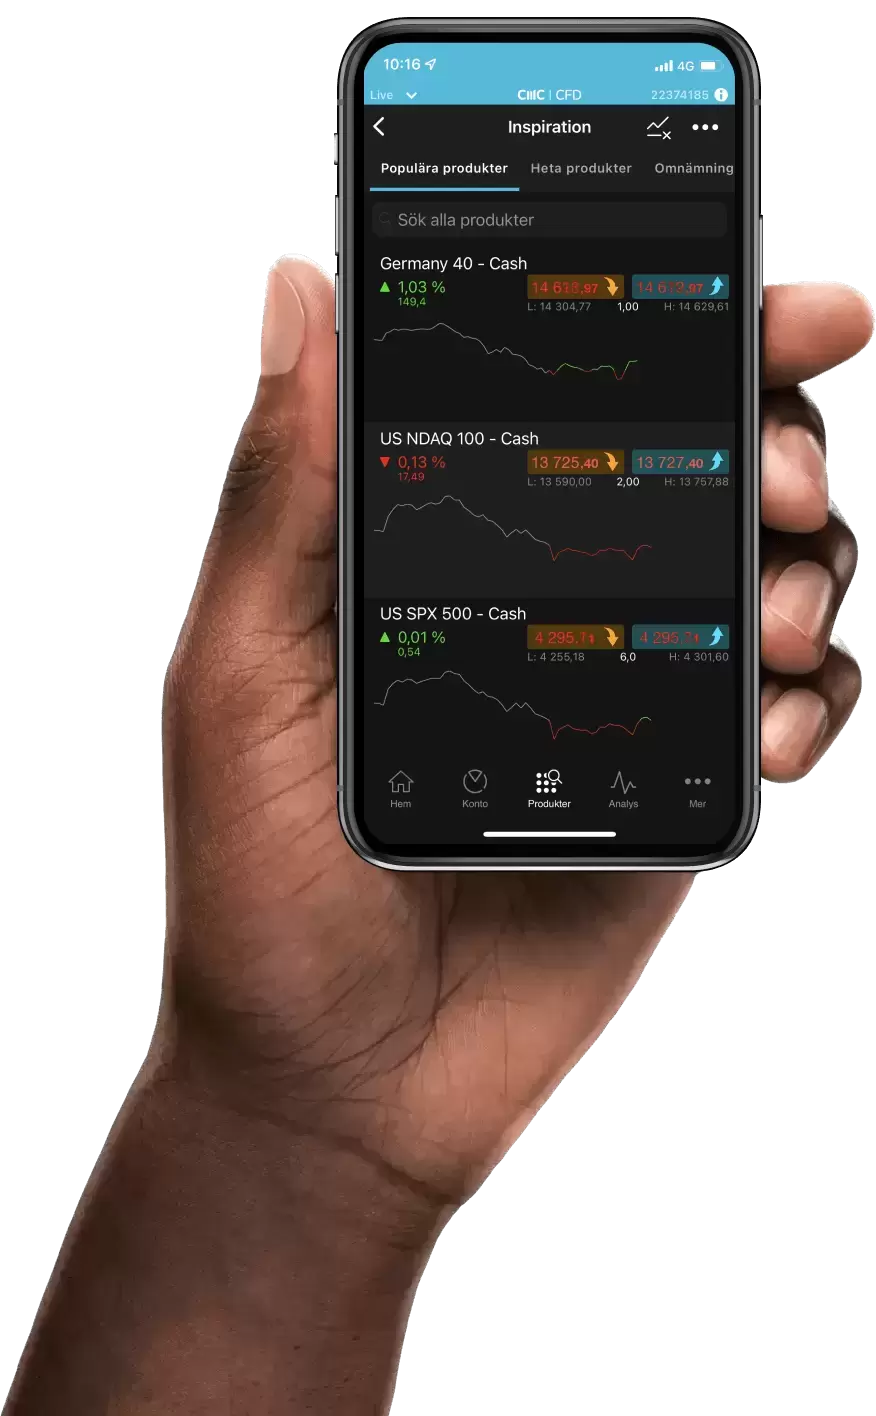 Mobile trading platform on iOS and Android